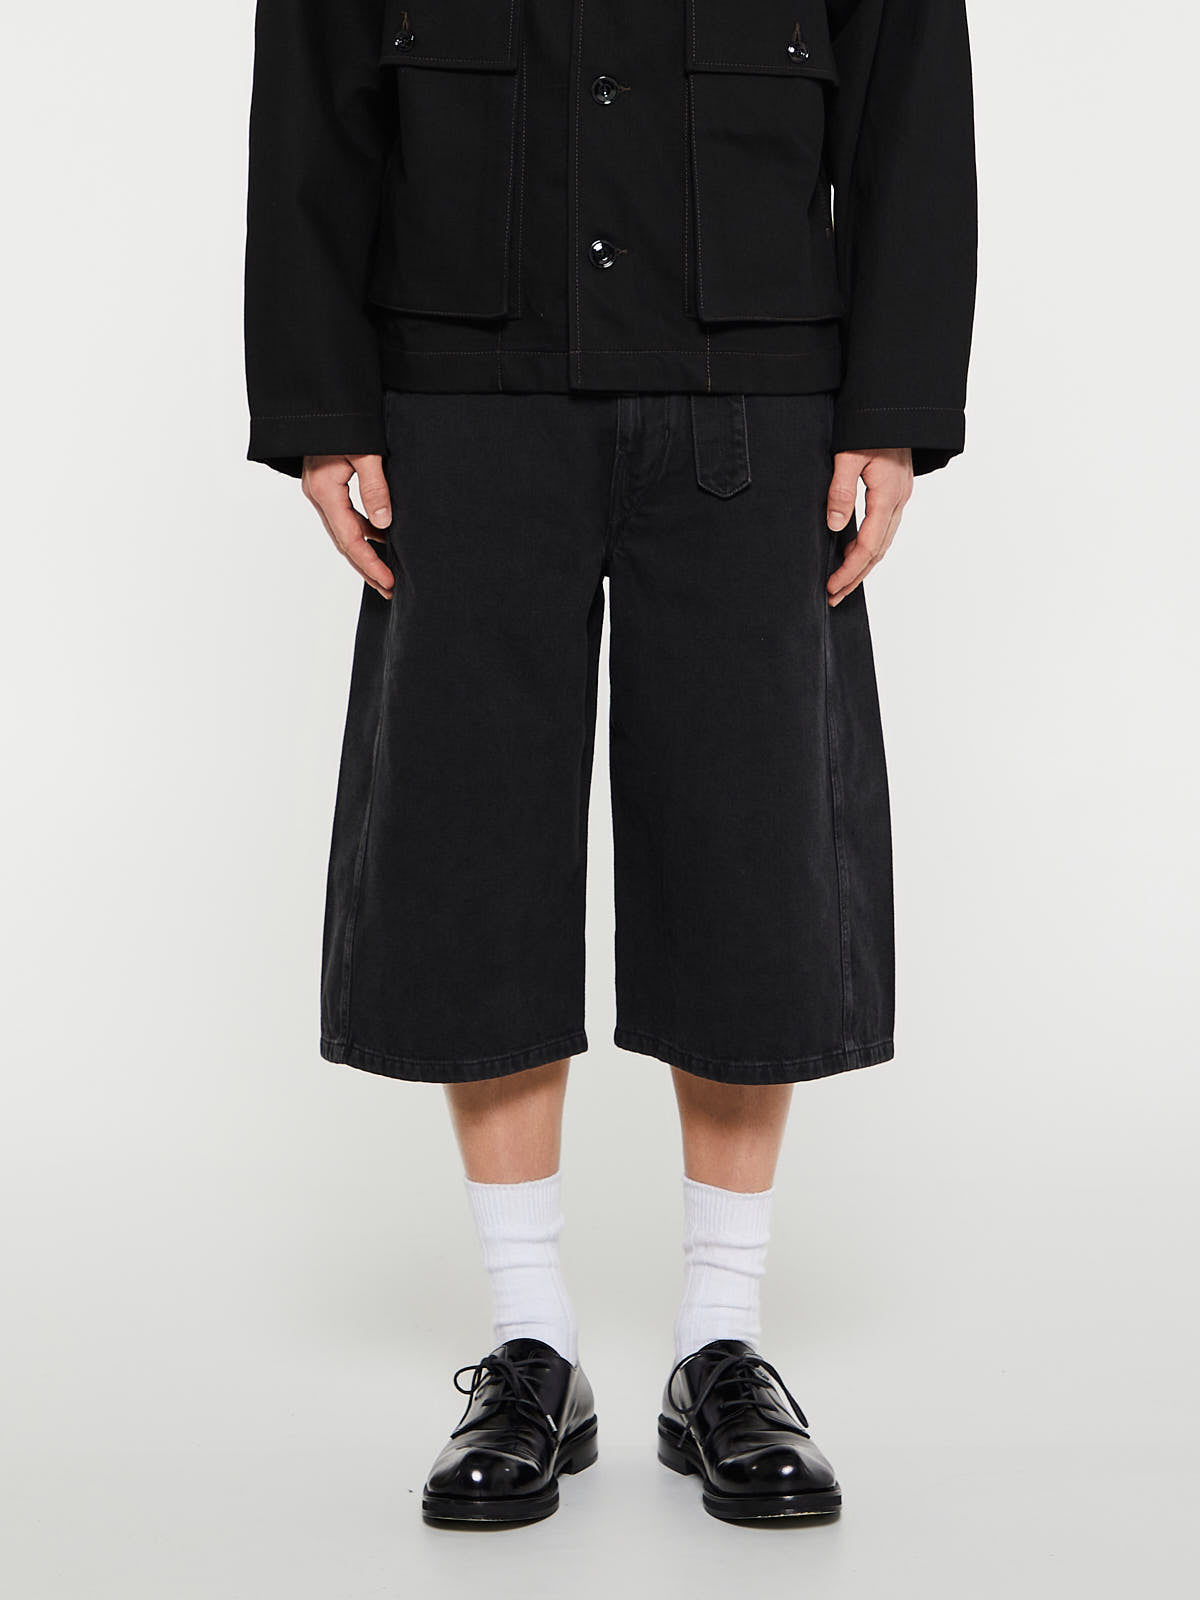 Lemaire - Twisted Shorts in Denim Soft Bleached Black